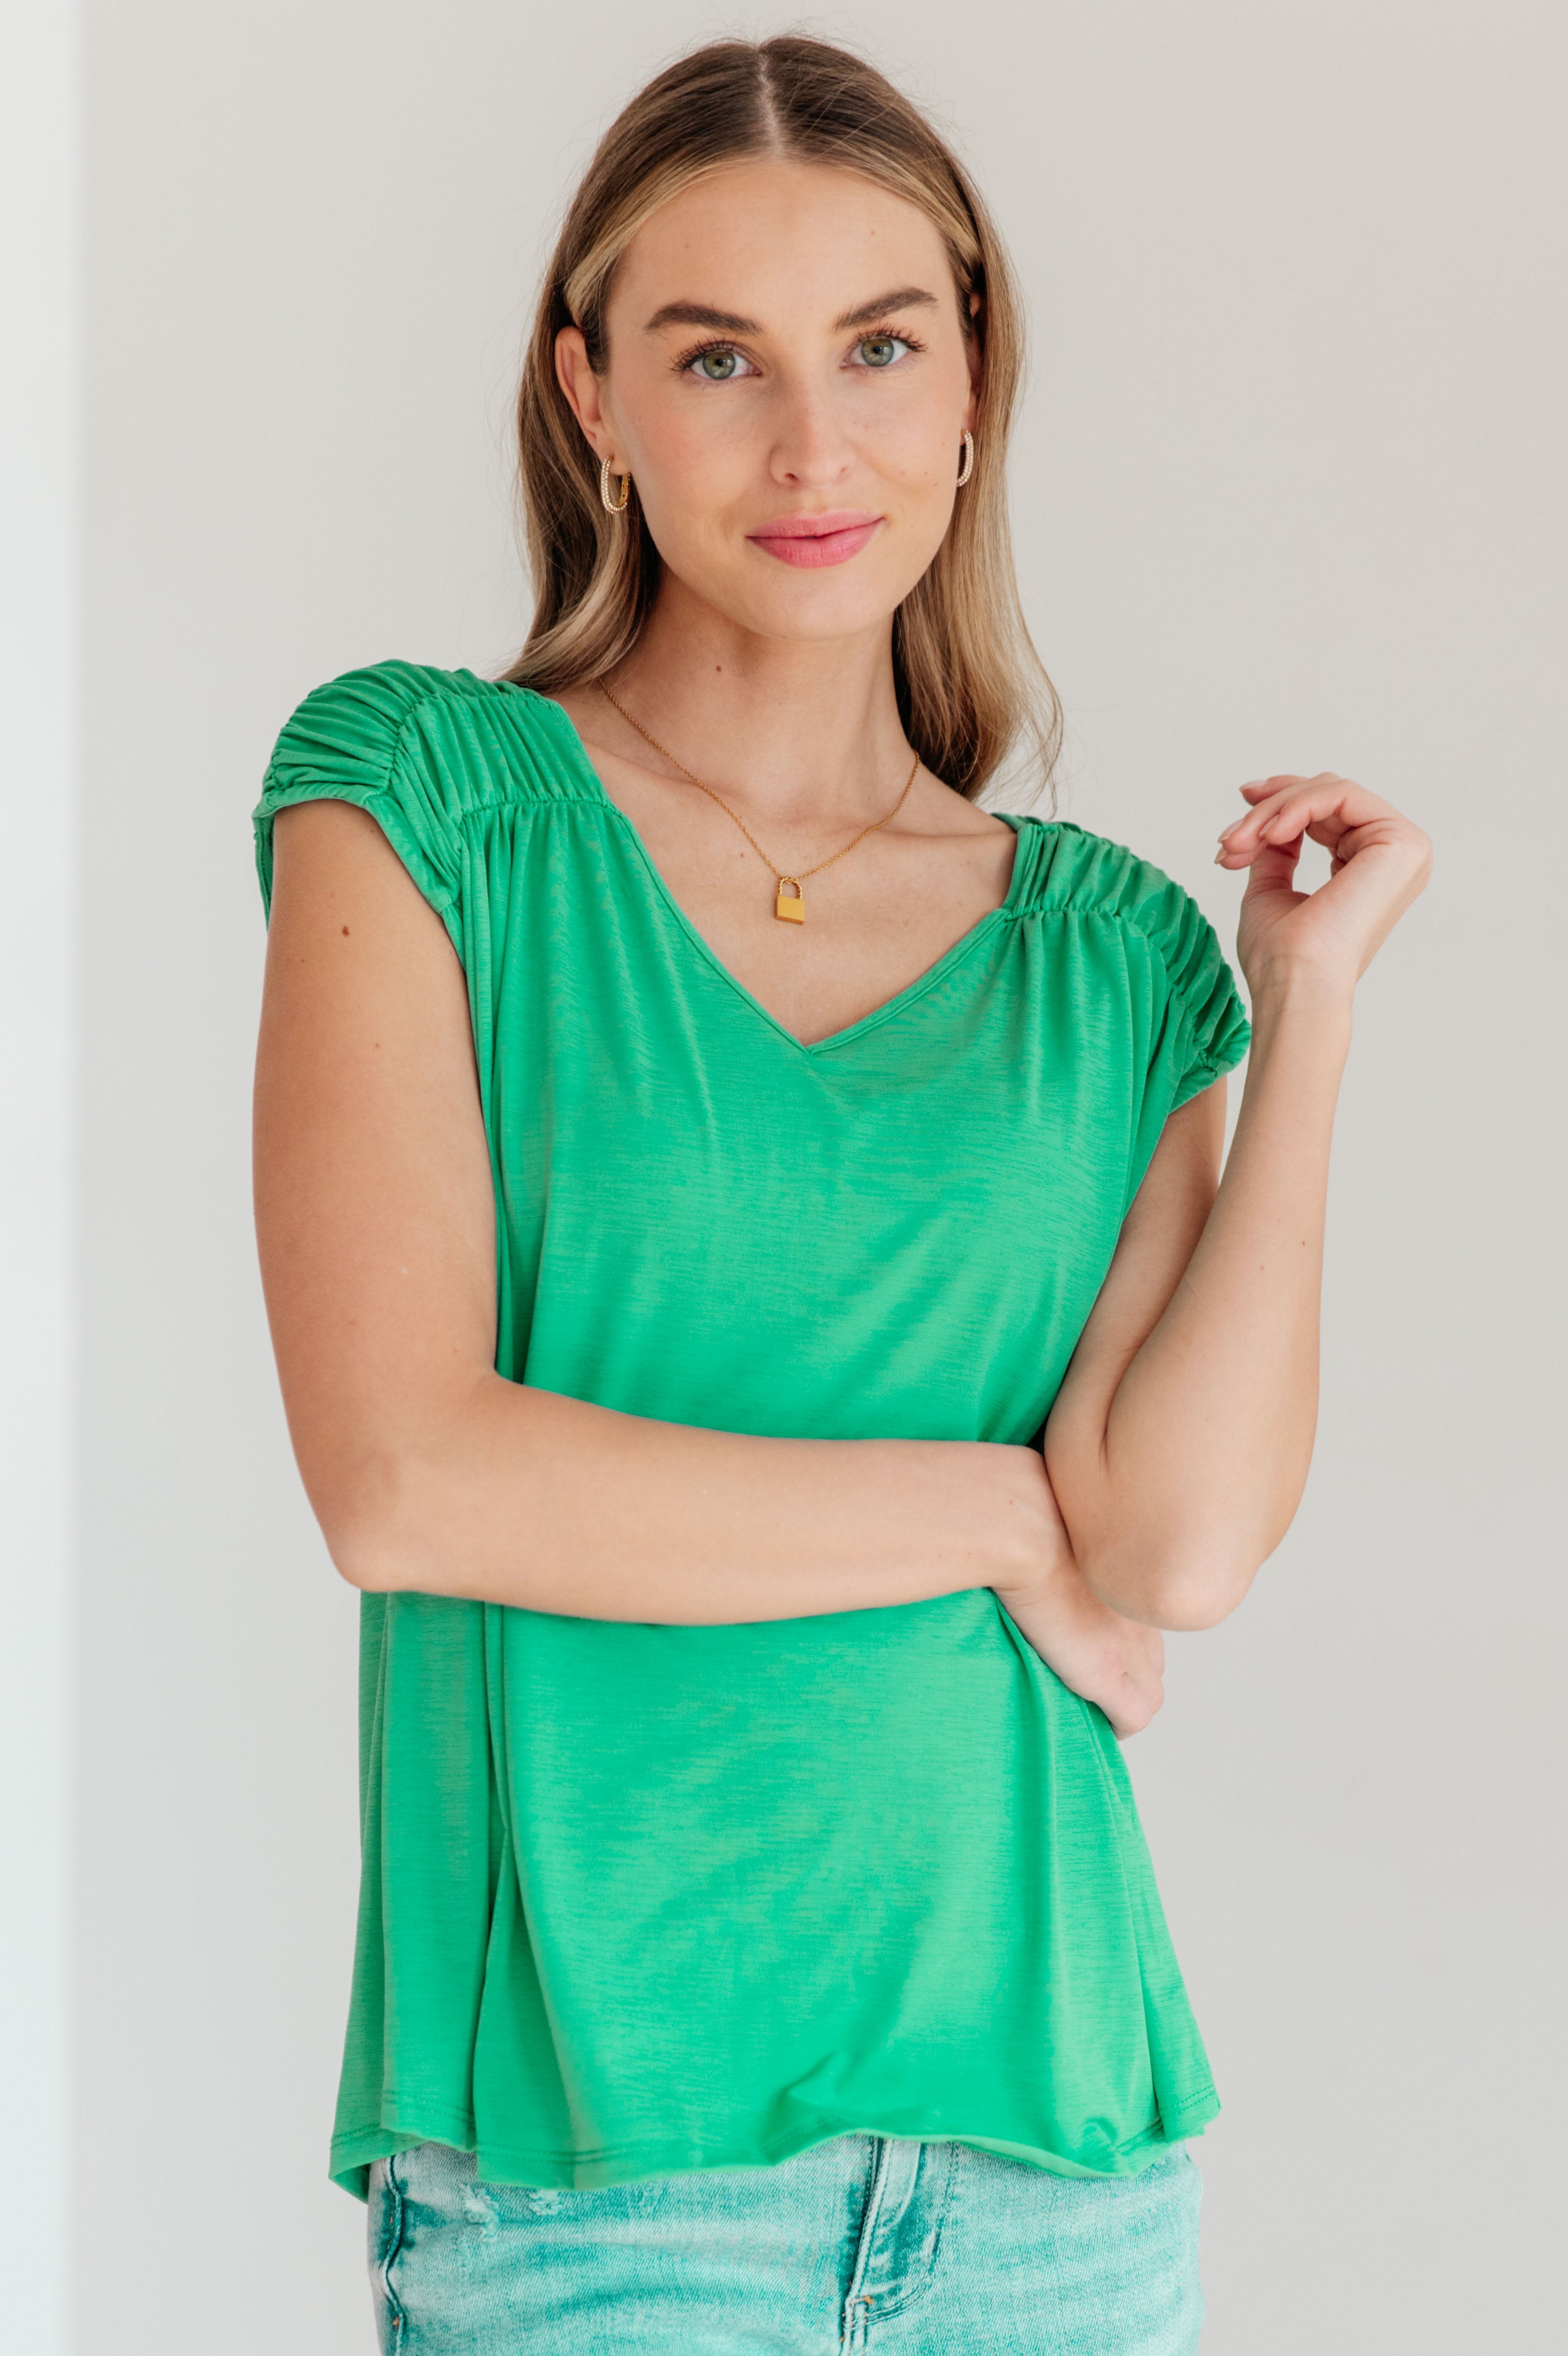 Ruched Cap Sleeve Top in Emerald Ave Shops